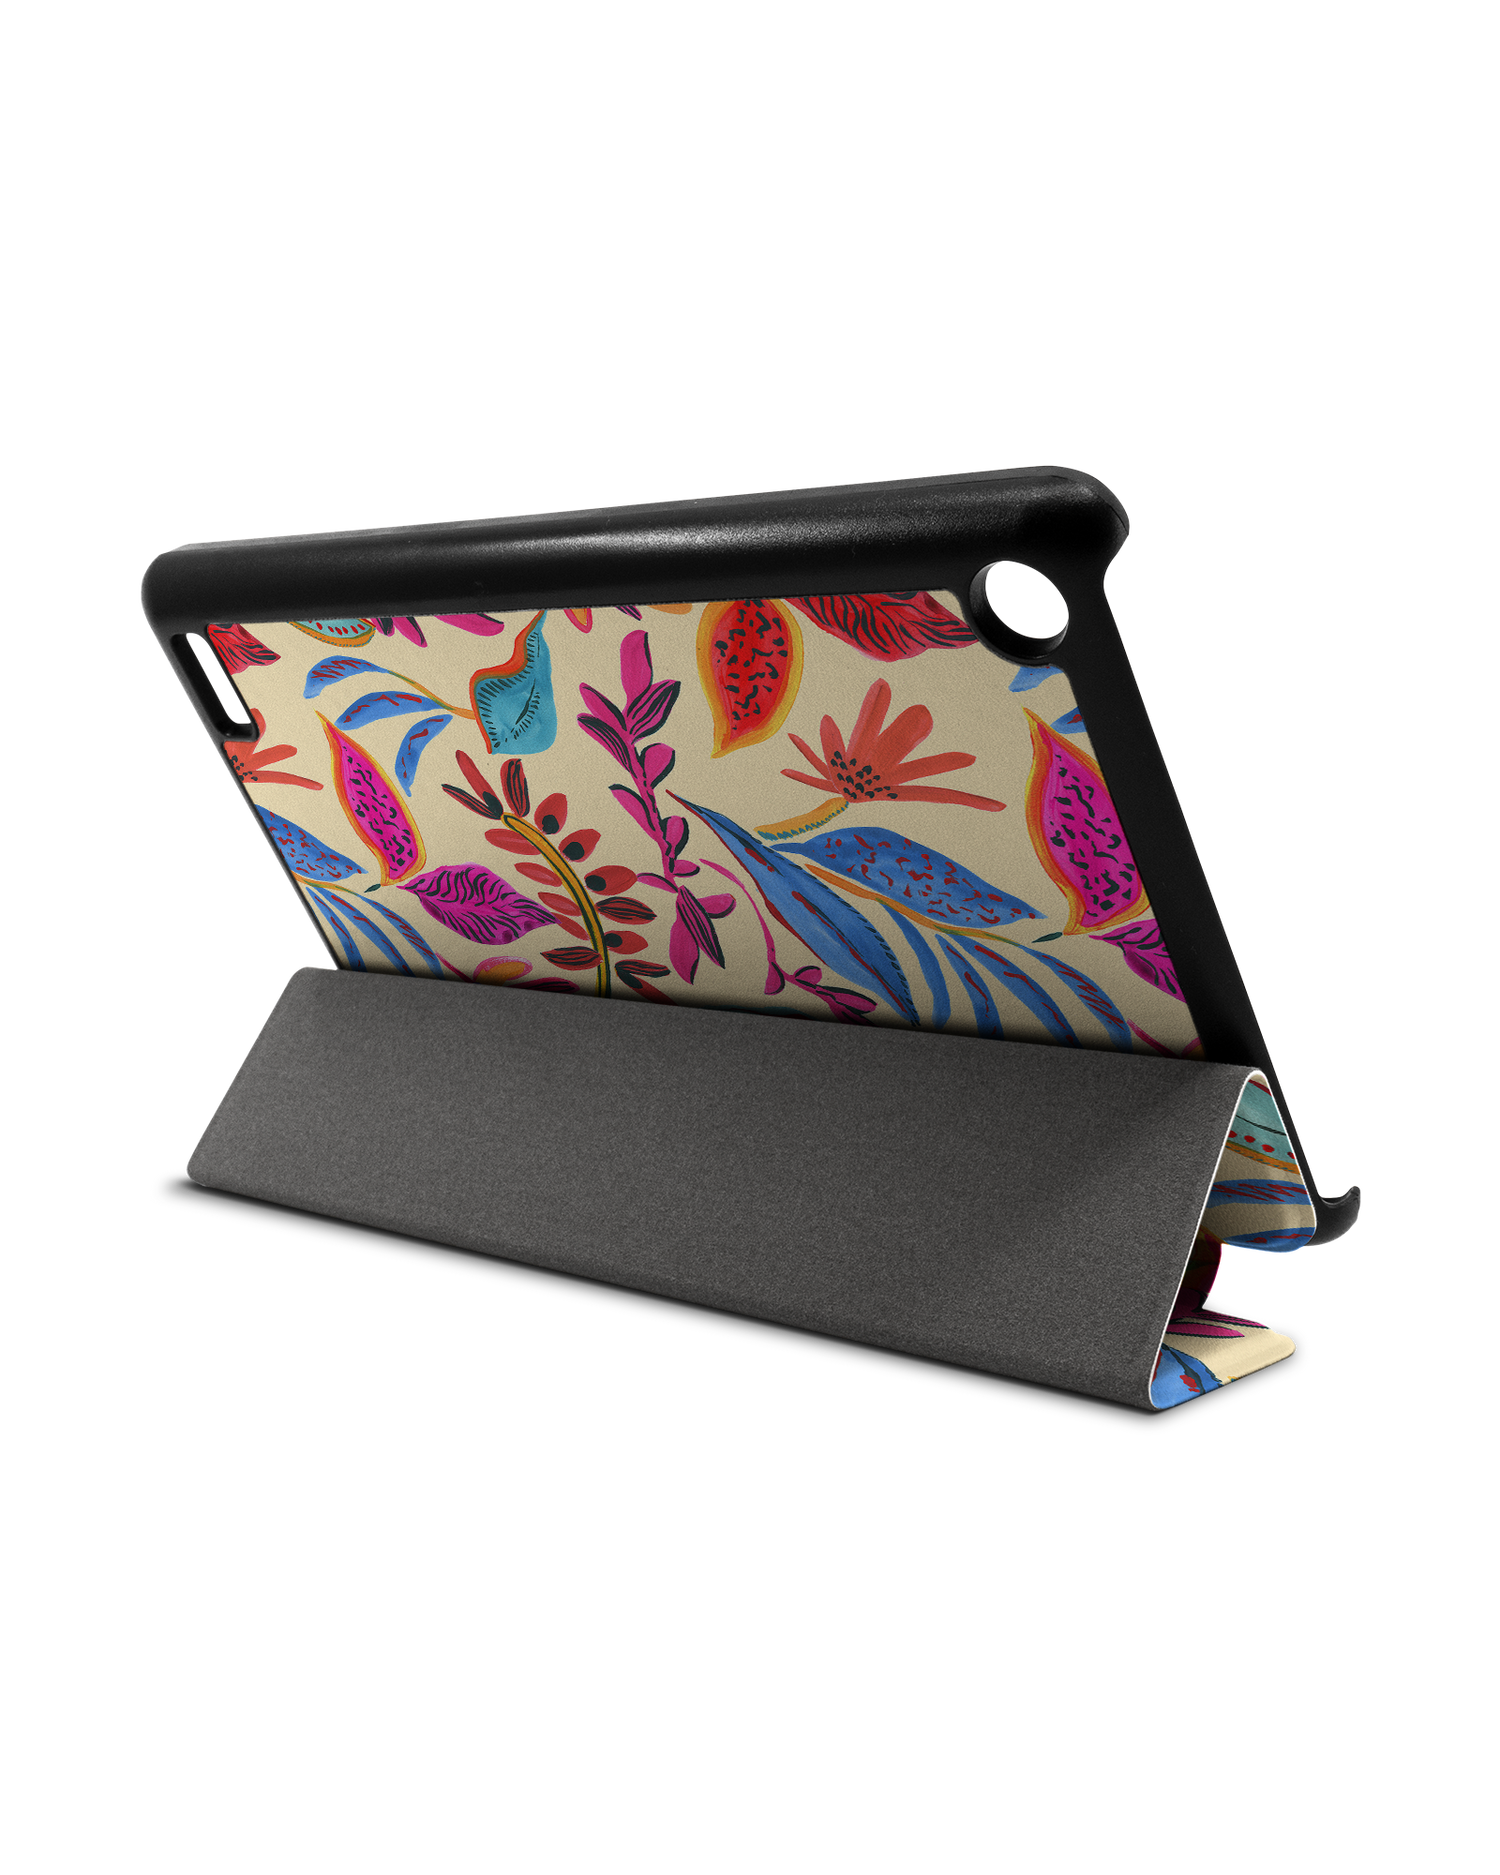 Painterly Spring Leaves Tablet Smart Case for Amazon Fire 7: Used as Stand